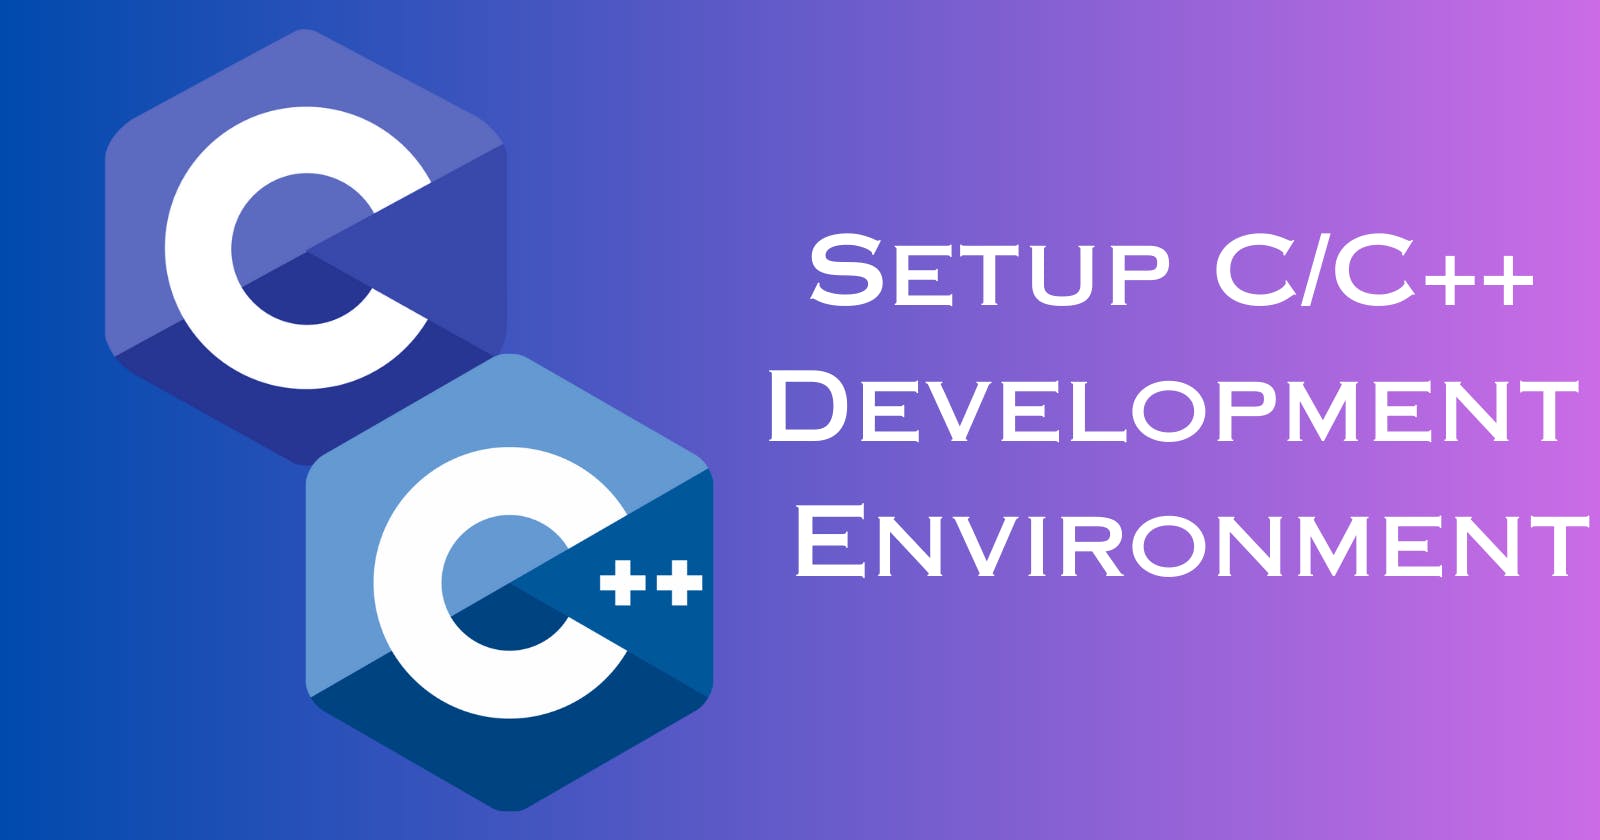 Guide To Set Up C/C++ Dev Environment